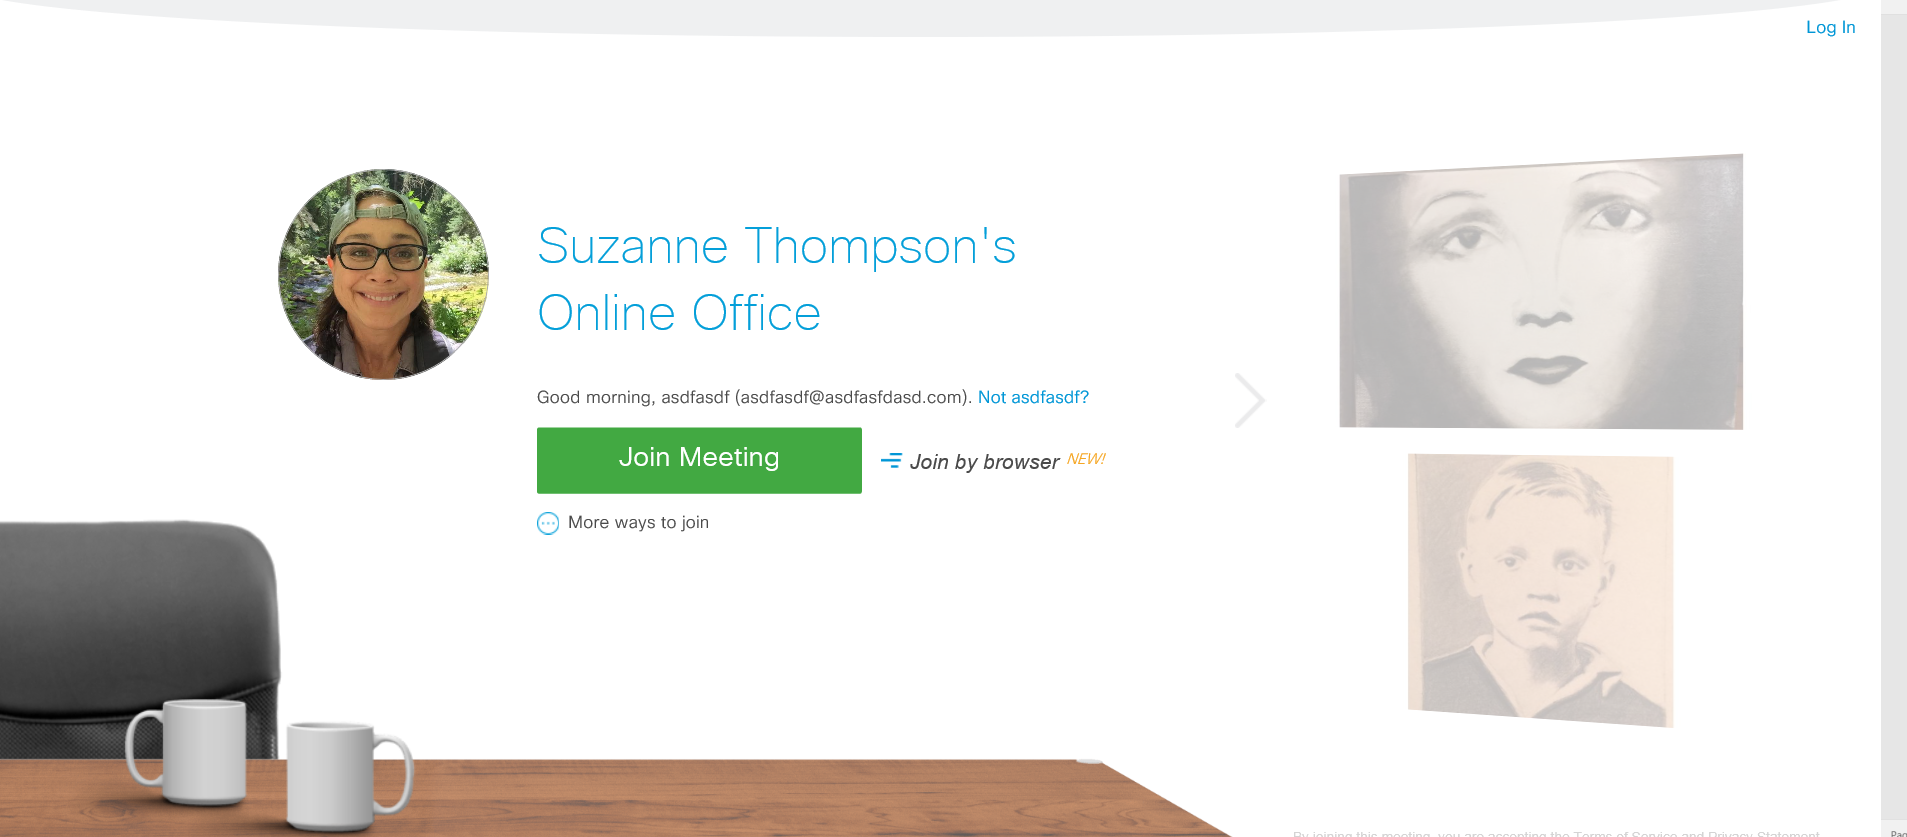 Screenshot of Suzanne Thompson's WebEx Personal Room Lobby